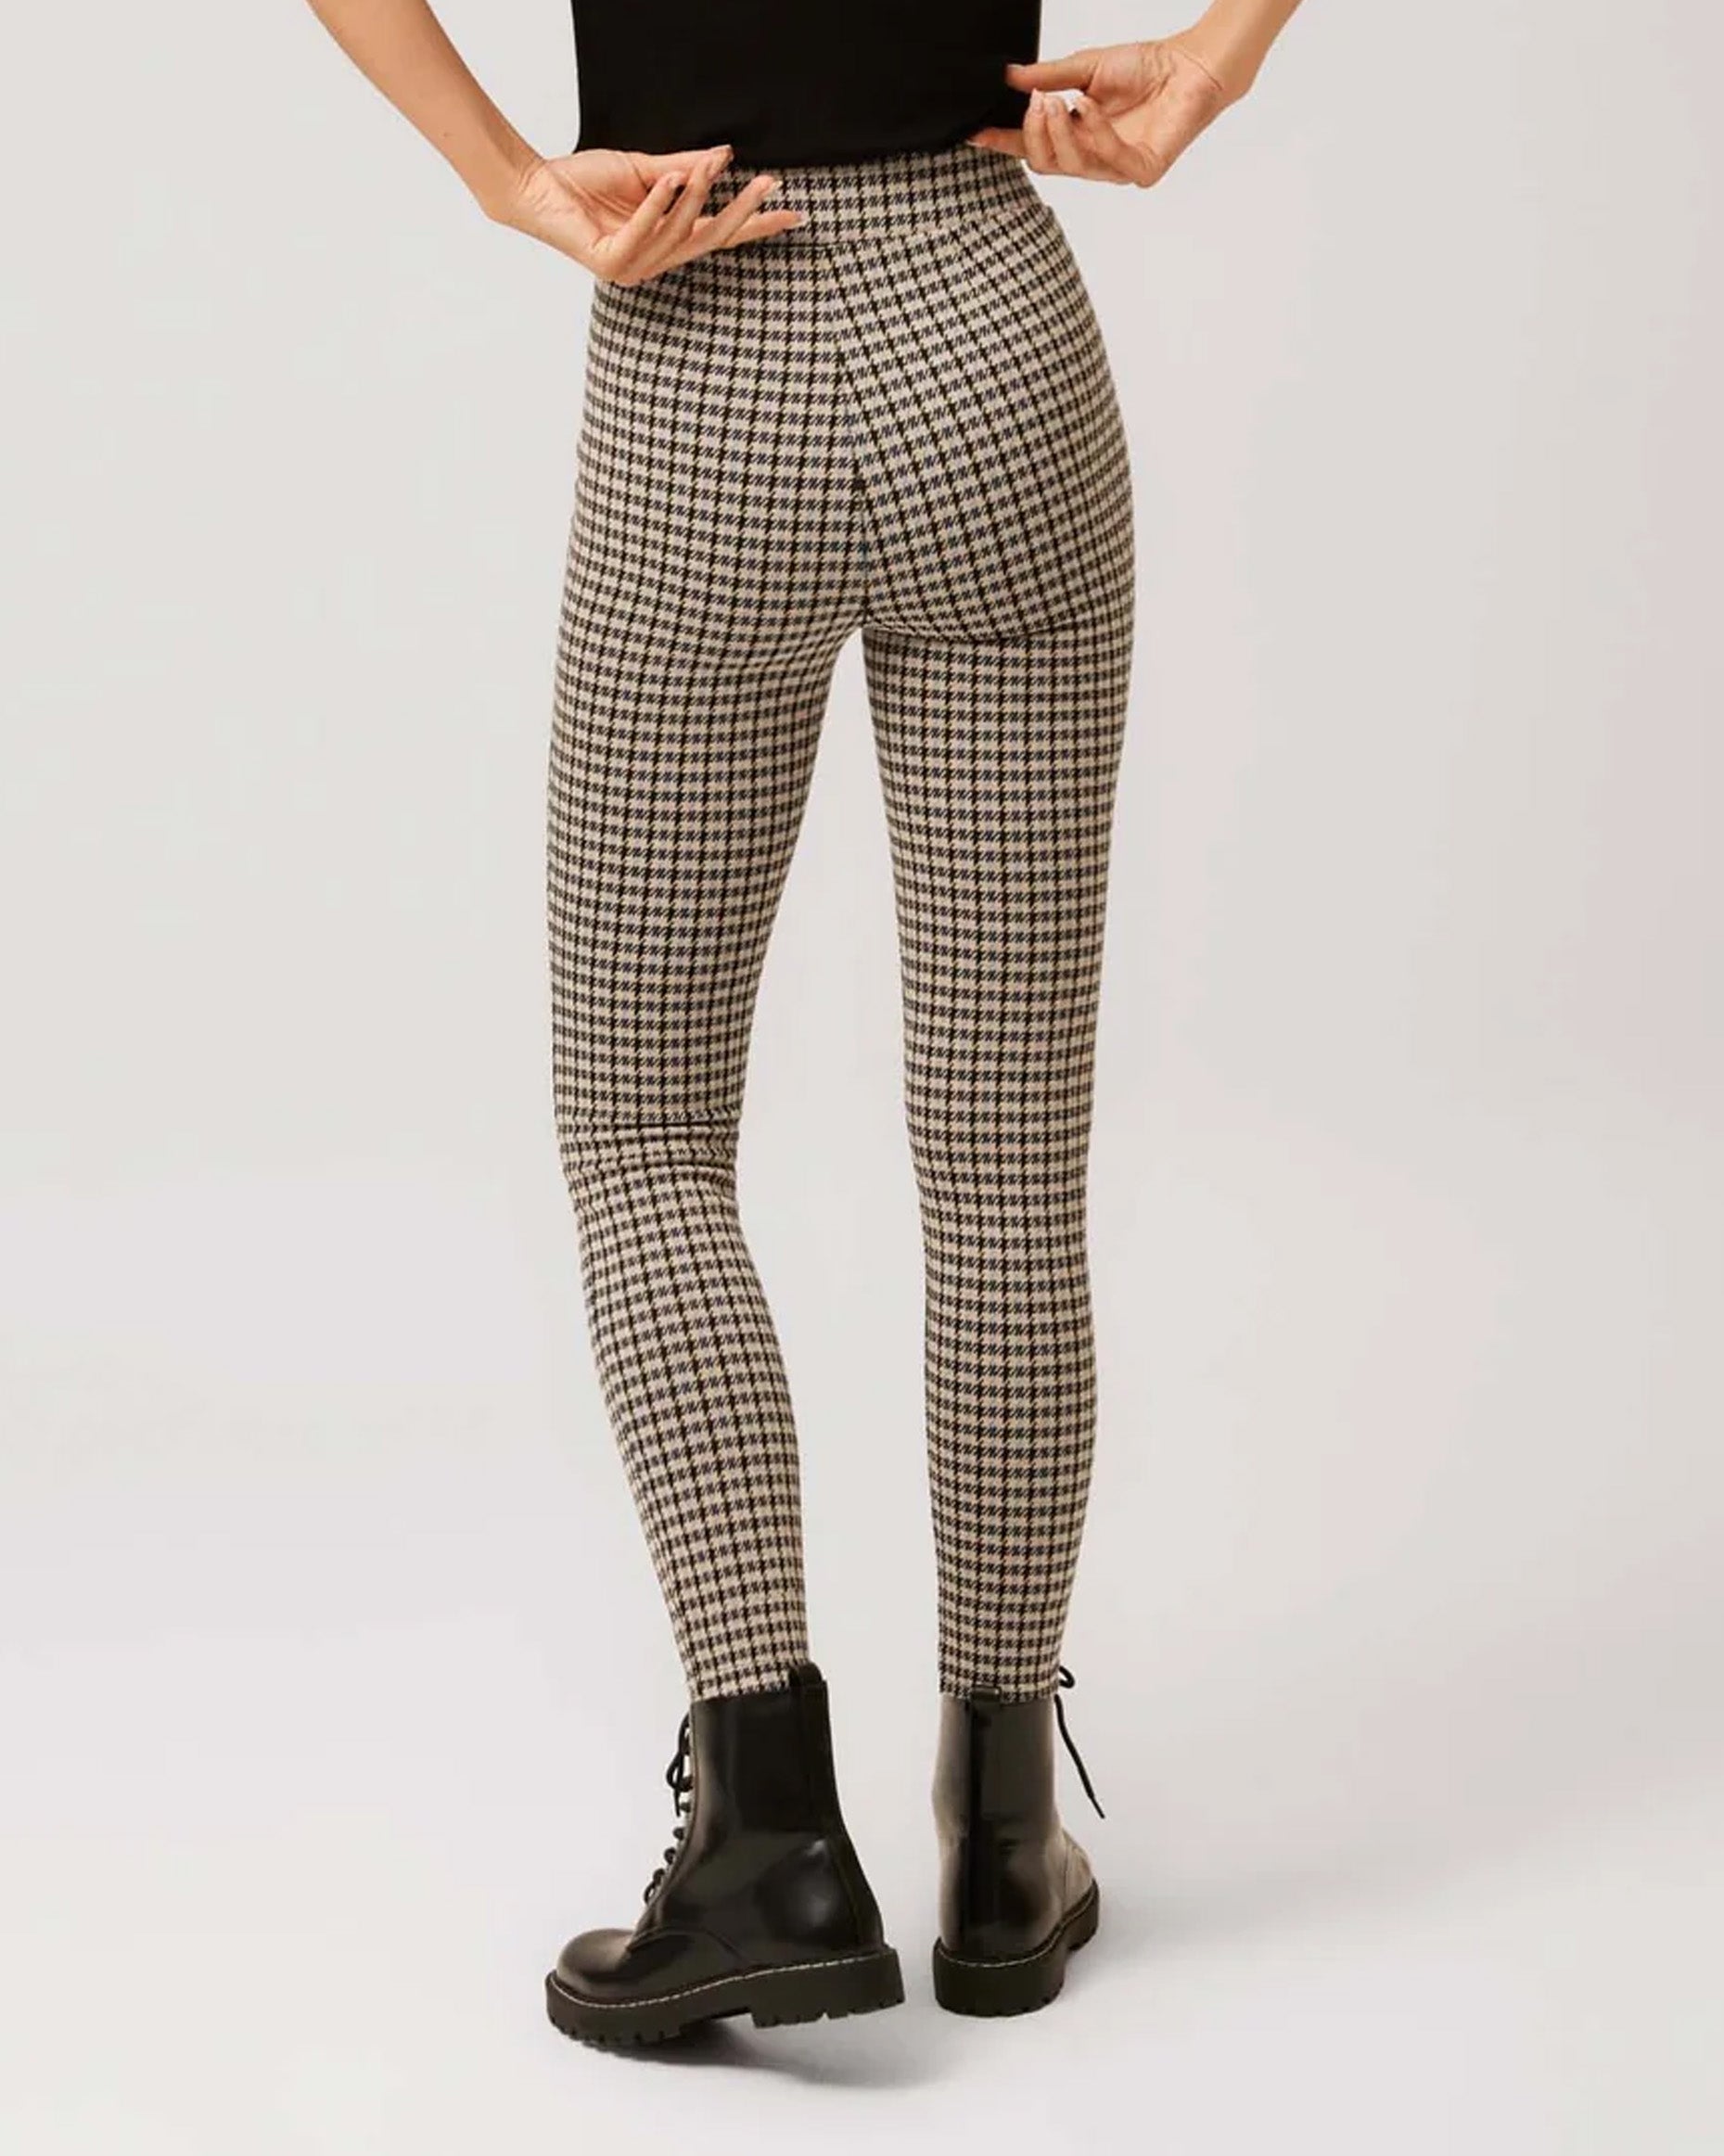 Ysabel Mora 70299 Check Treggings - High waisted light beige trouser leggings with a black and blue houndstooth style check and raised seam up the centre of the legs.